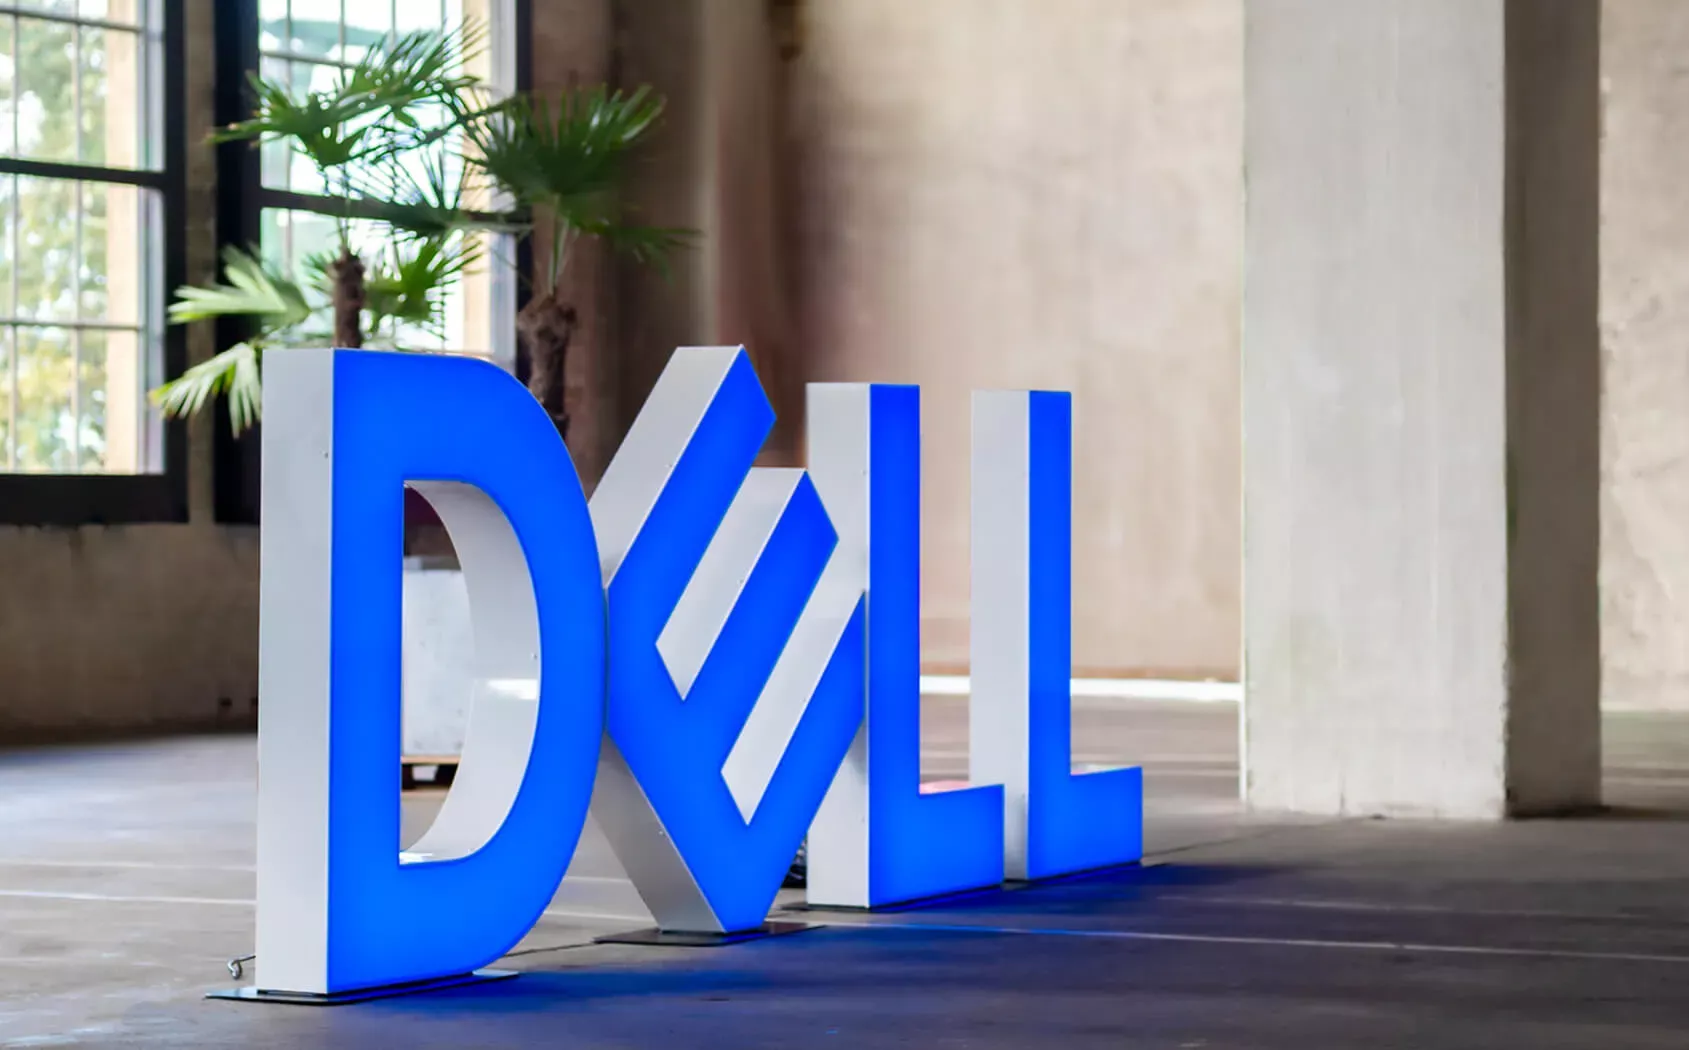 dell letters - Large freestanding letters